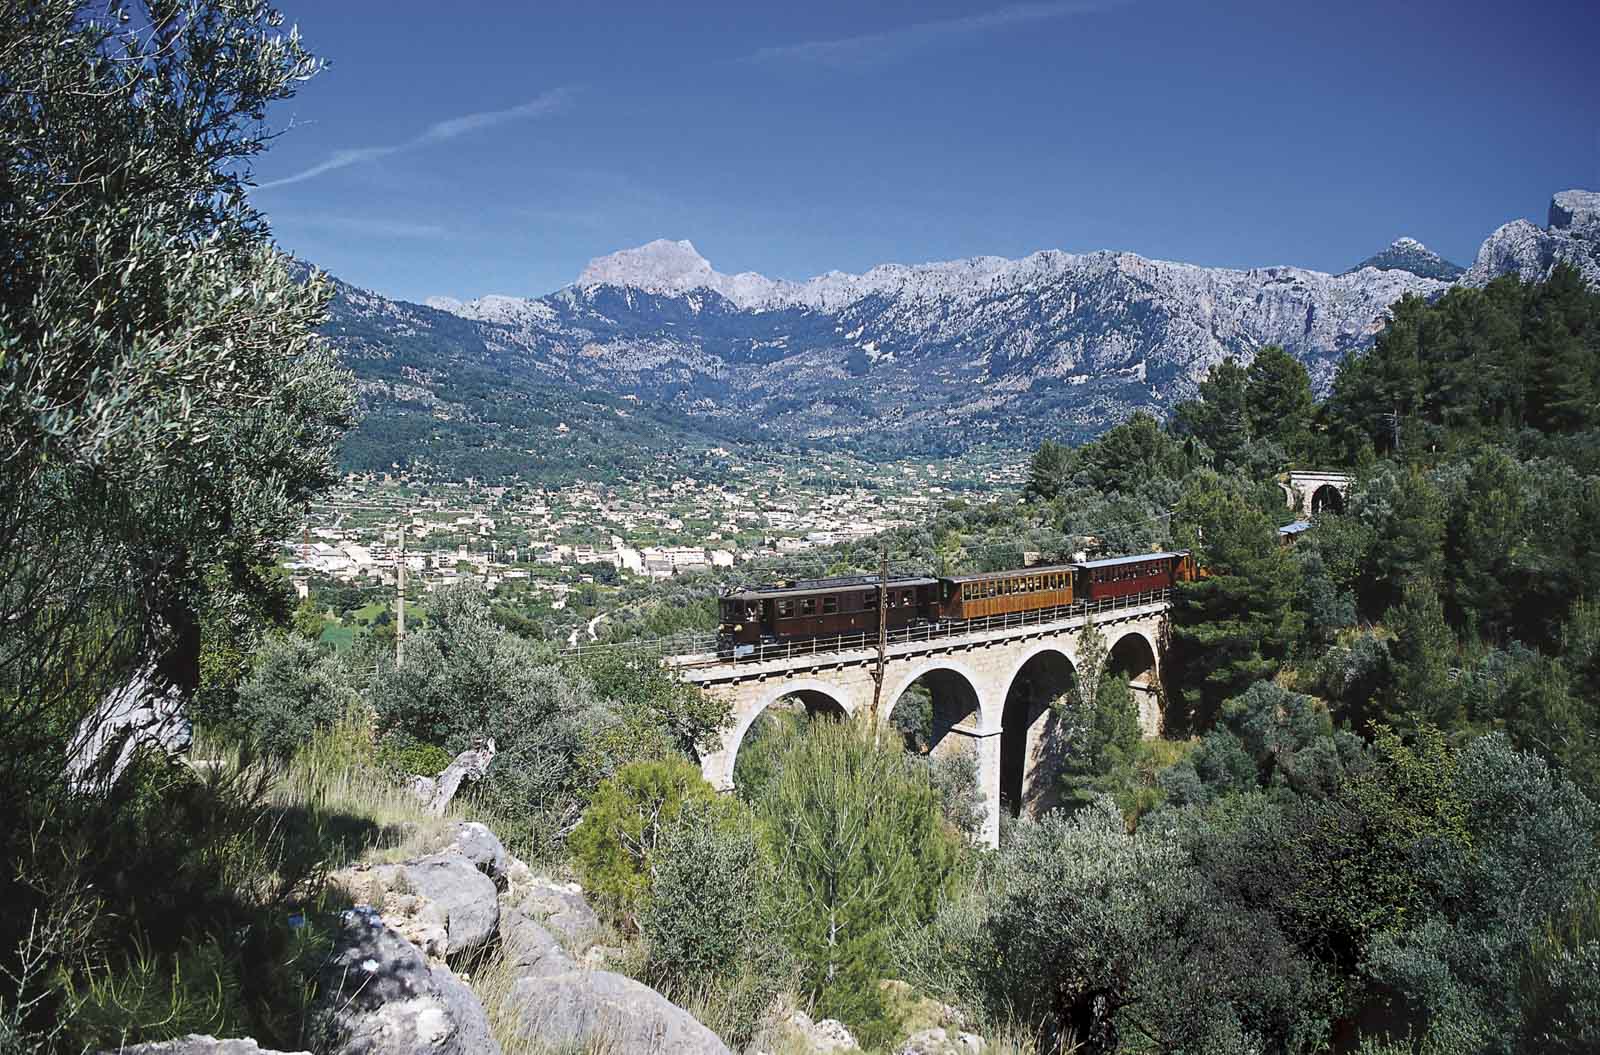 Historical railway from Palma to Soller